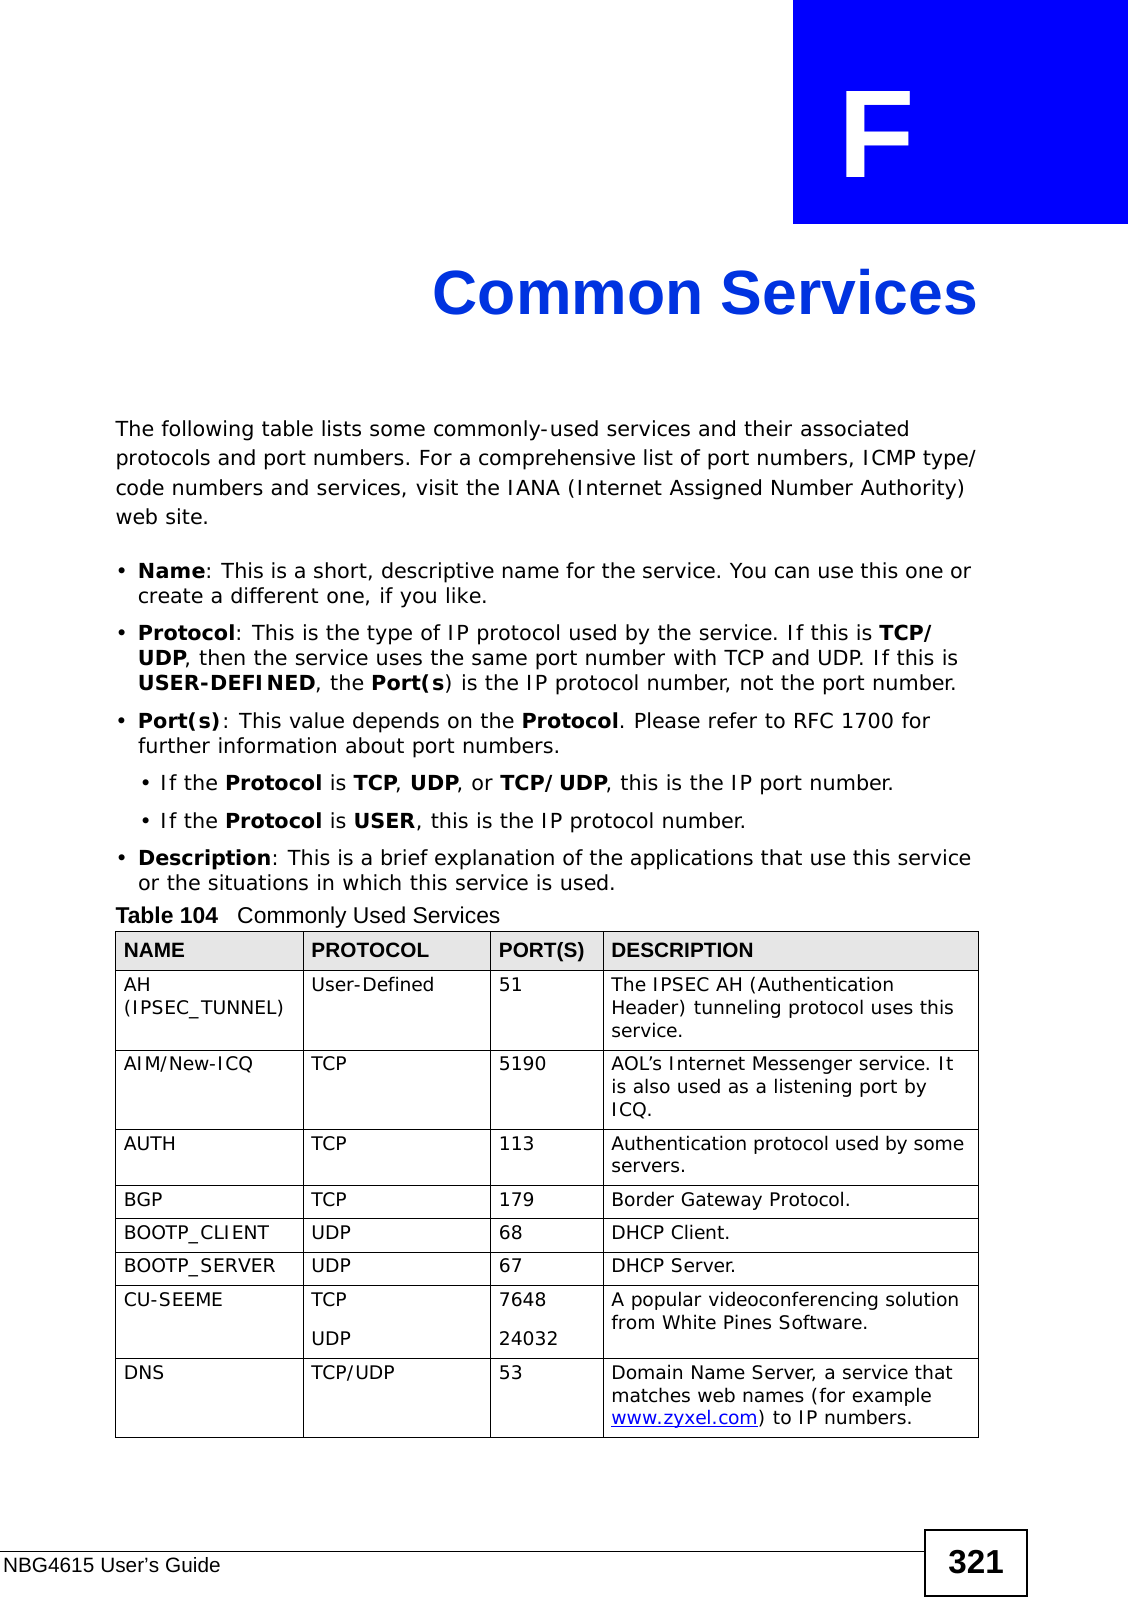 NBG4615 User’s Guide 321APPENDIX  F Common ServicesThe following table lists some commonly-used services and their associated protocols and port numbers. For a comprehensive list of port numbers, ICMP type/code numbers and services, visit the IANA (Internet Assigned Number Authority) web site. •Name: This is a short, descriptive name for the service. You can use this one or create a different one, if you like.•Protocol: This is the type of IP protocol used by the service. If this is TCP/UDP, then the service uses the same port number with TCP and UDP. If this is USER-DEFINED, the Port(s) is the IP protocol number, not the port number.•Port(s): This value depends on the Protocol. Please refer to RFC 1700 for further information about port numbers.•If the Protocol is TCP, UDP, or TCP/UDP, this is the IP port number.•If the Protocol is USER, this is the IP protocol number.•Description: This is a brief explanation of the applications that use this service or the situations in which this service is used.Table 104   Commonly Used ServicesNAME PROTOCOL PORT(S) DESCRIPTIONAH (IPSEC_TUNNEL) User-Defined 51 The IPSEC AH (Authentication Header) tunneling protocol uses this service.AIM/New-ICQ TCP 5190 AOL’s Internet Messenger service. It is also used as a listening port by ICQ.AUTH TCP 113 Authentication protocol used by some servers.BGP TCP 179 Border Gateway Protocol.BOOTP_CLIENT UDP 68 DHCP Client.BOOTP_SERVER UDP 67 DHCP Server.CU-SEEME TCPUDP764824032A popular videoconferencing solution from White Pines Software.DNS TCP/UDP 53 Domain Name Server, a service that matches web names (for example www.zyxel.com) to IP numbers.